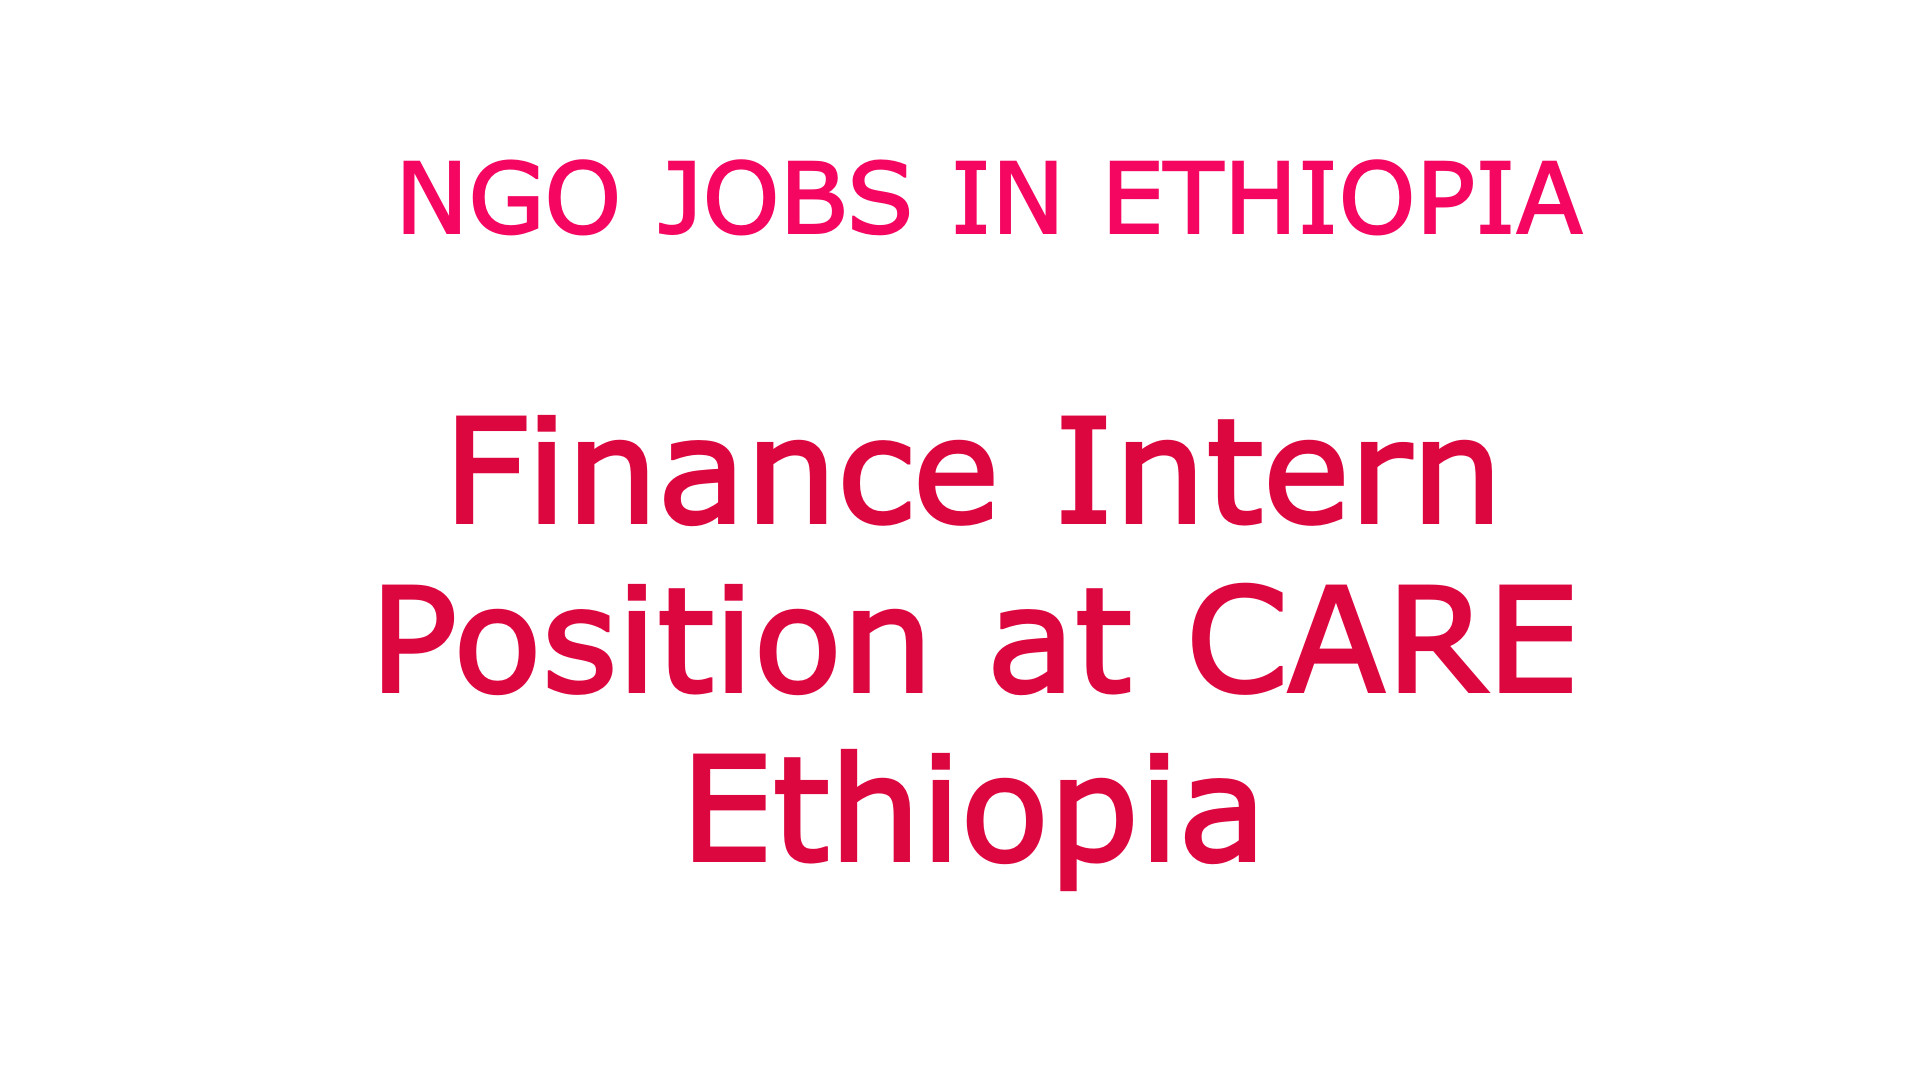 Vacancy announcement for Finance Intern at CARE Ethiopia NGO jobs 2022